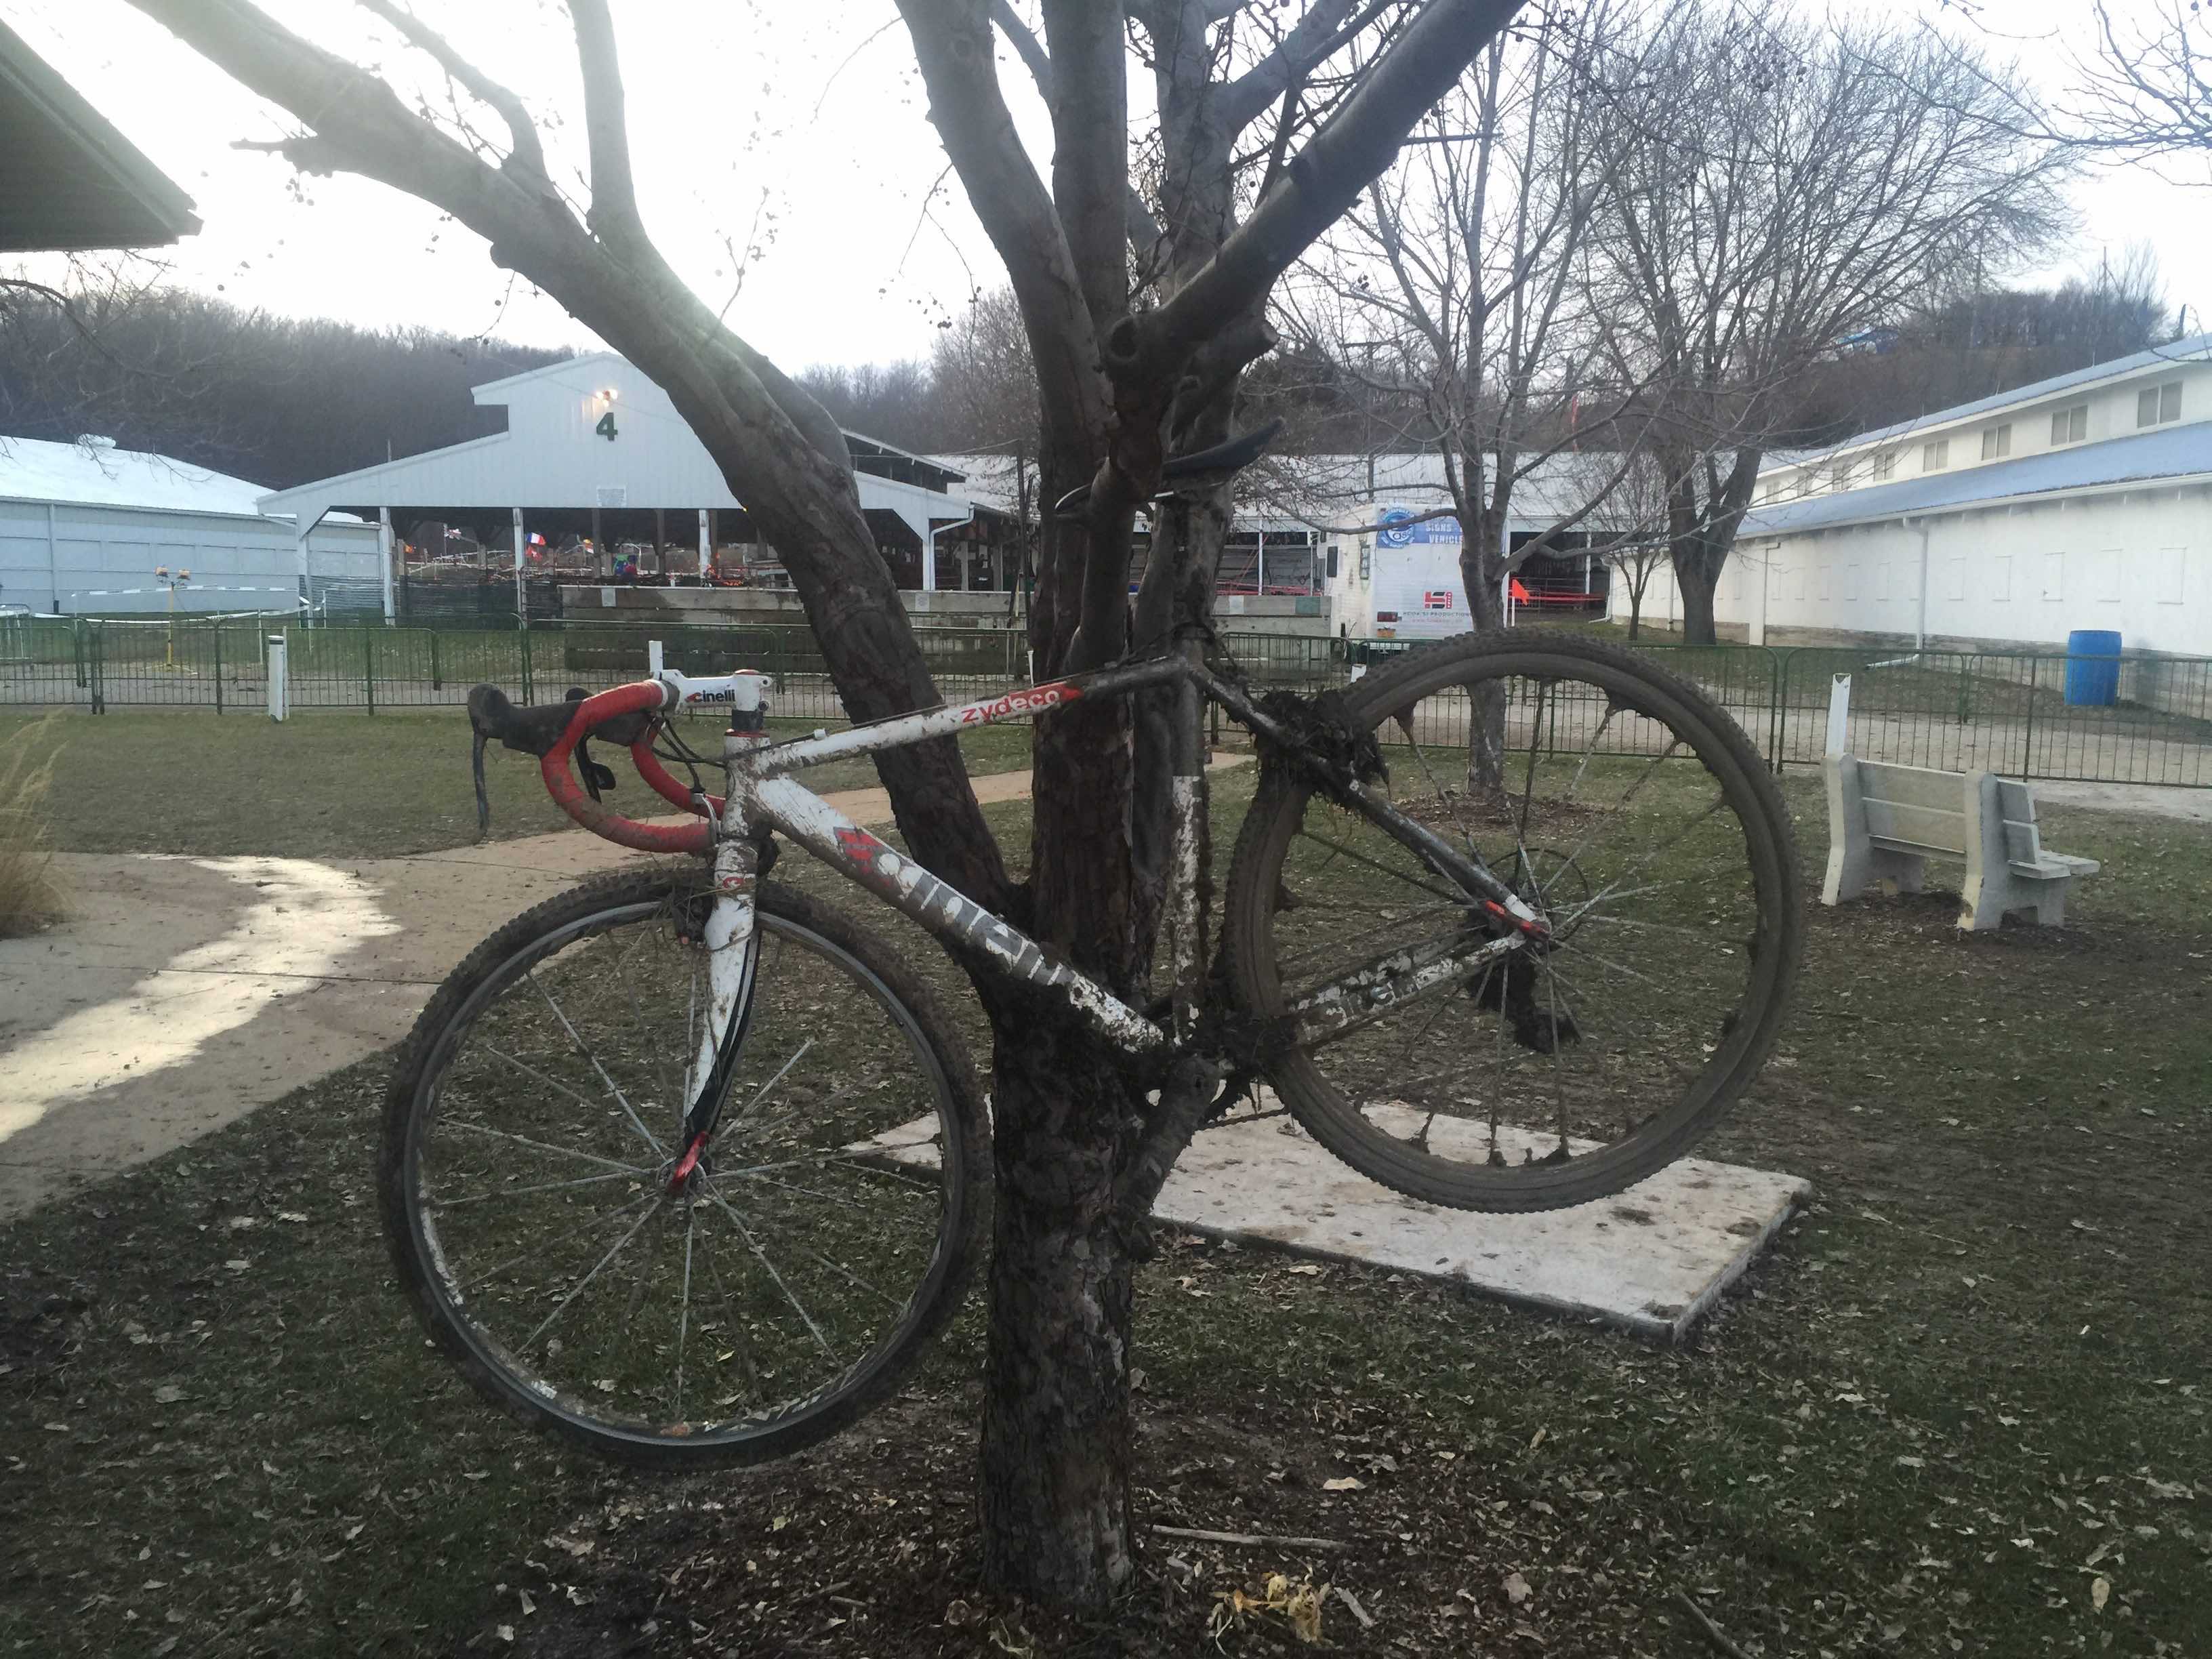 Leaving the shower, late this afternoon, this bike was just hanging in this tree.  It looked like it had been there a while and was going to stay there.  Kind of summed up the day for a lot of the riders.